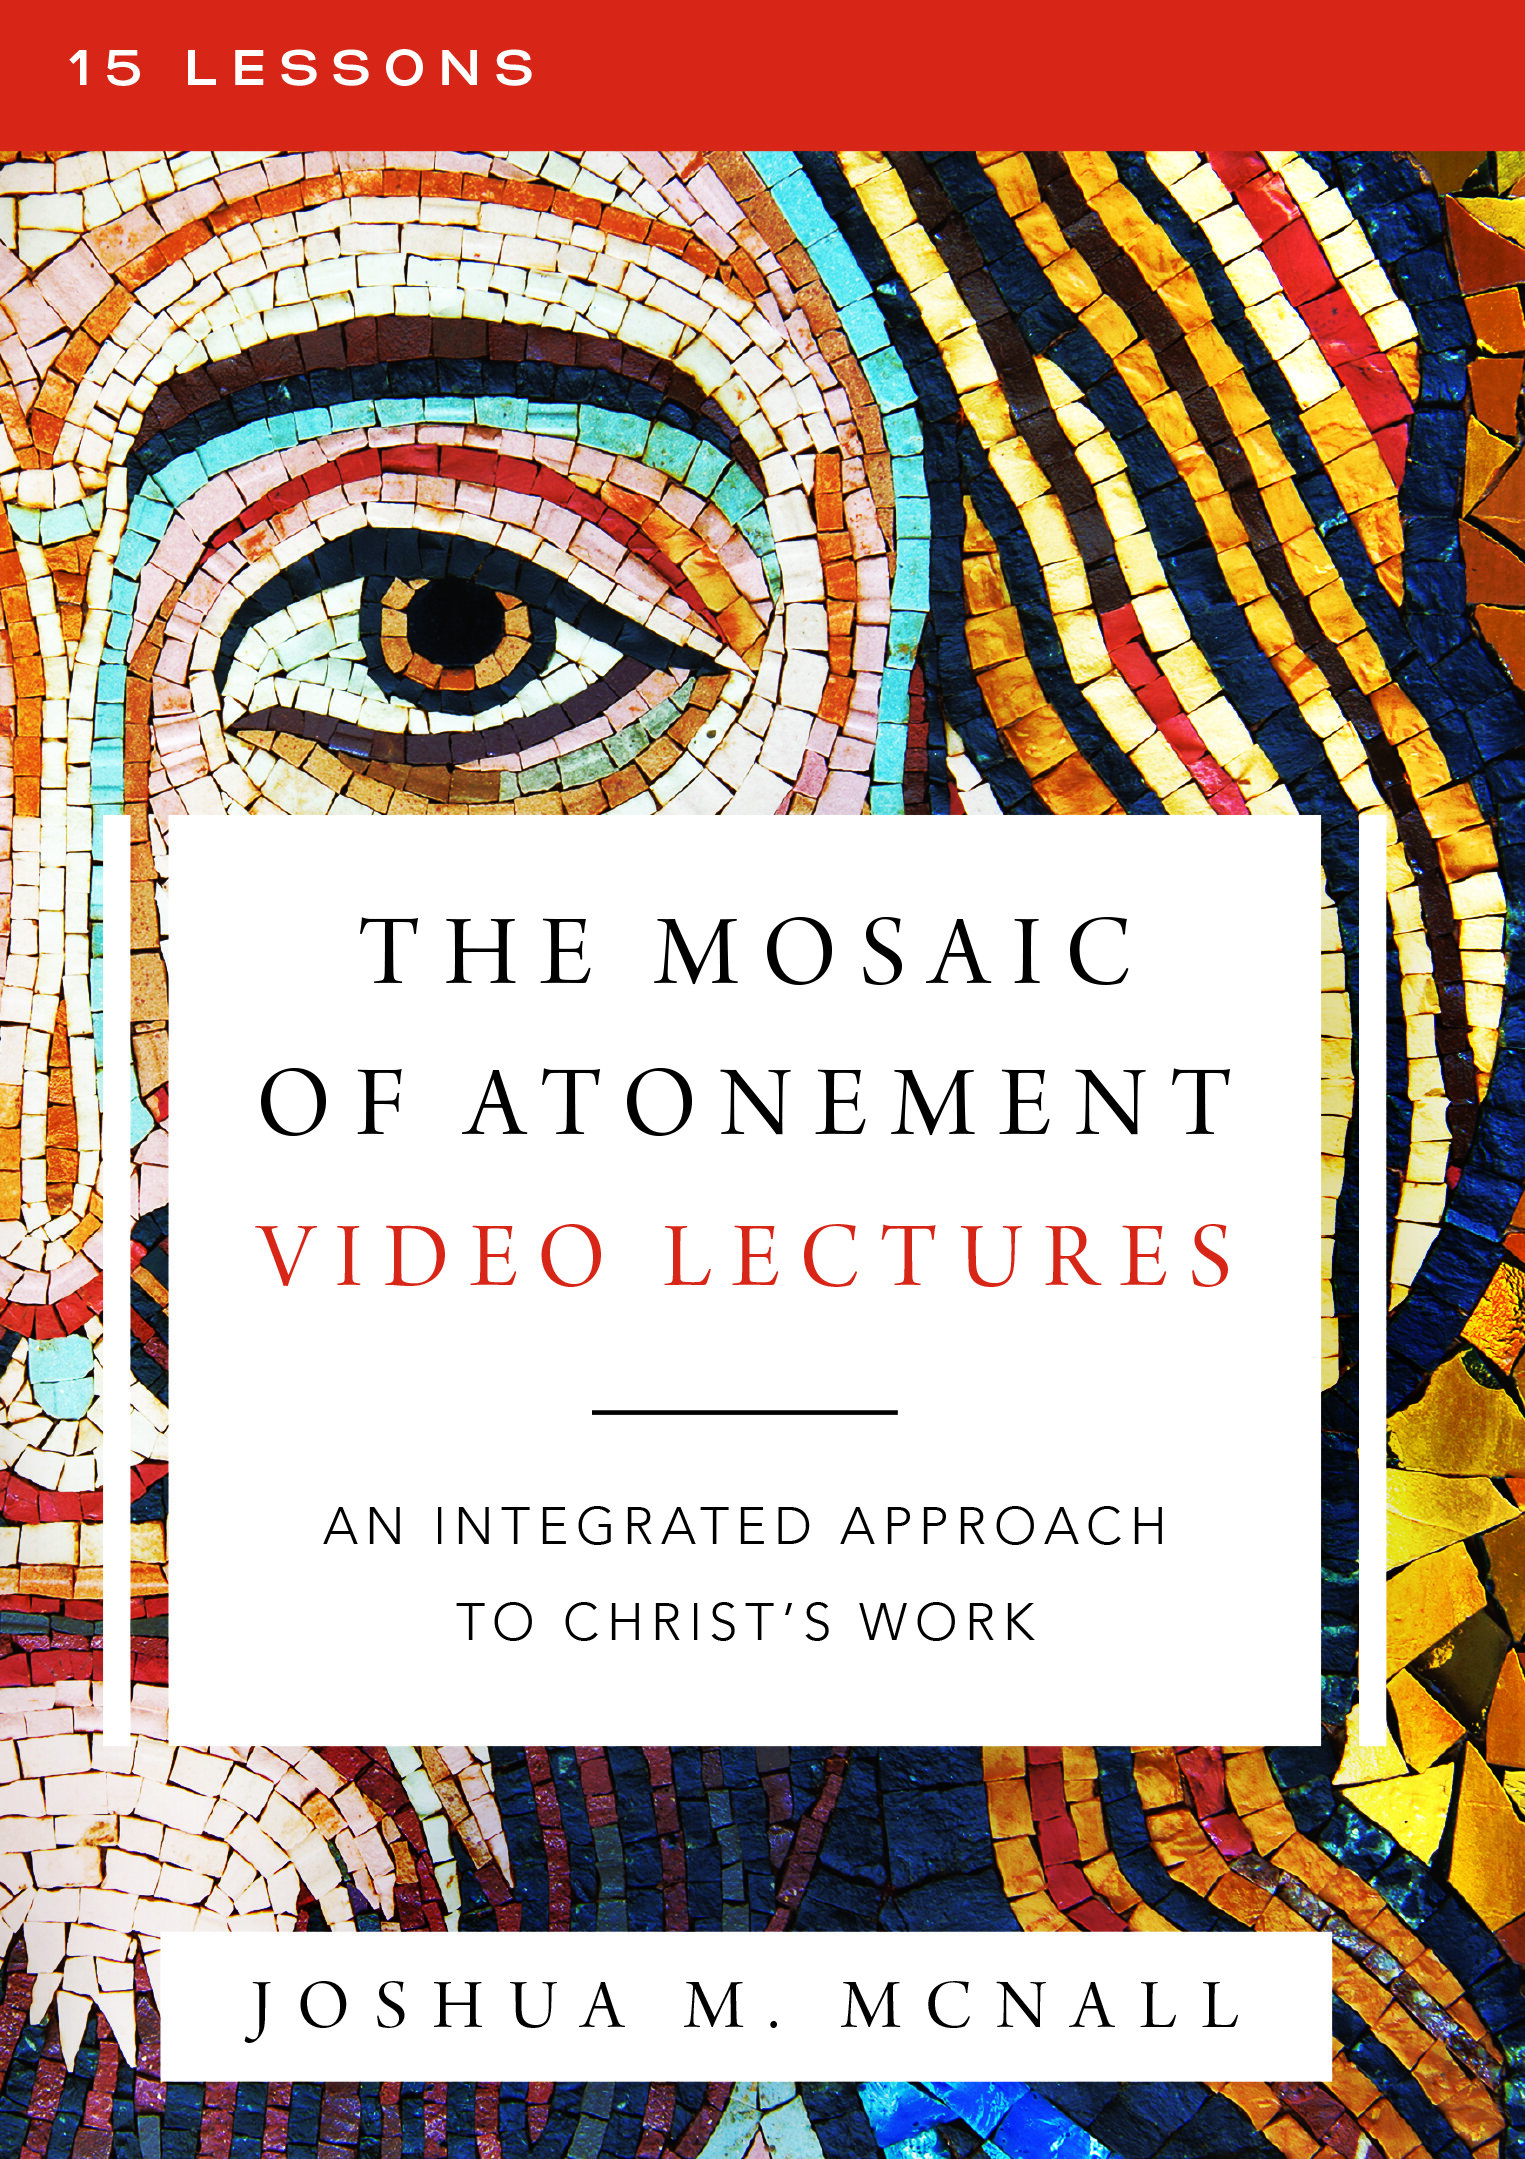 The Mosaic of Atonement Video Lectures: An Integrated Approach to Christ's Work